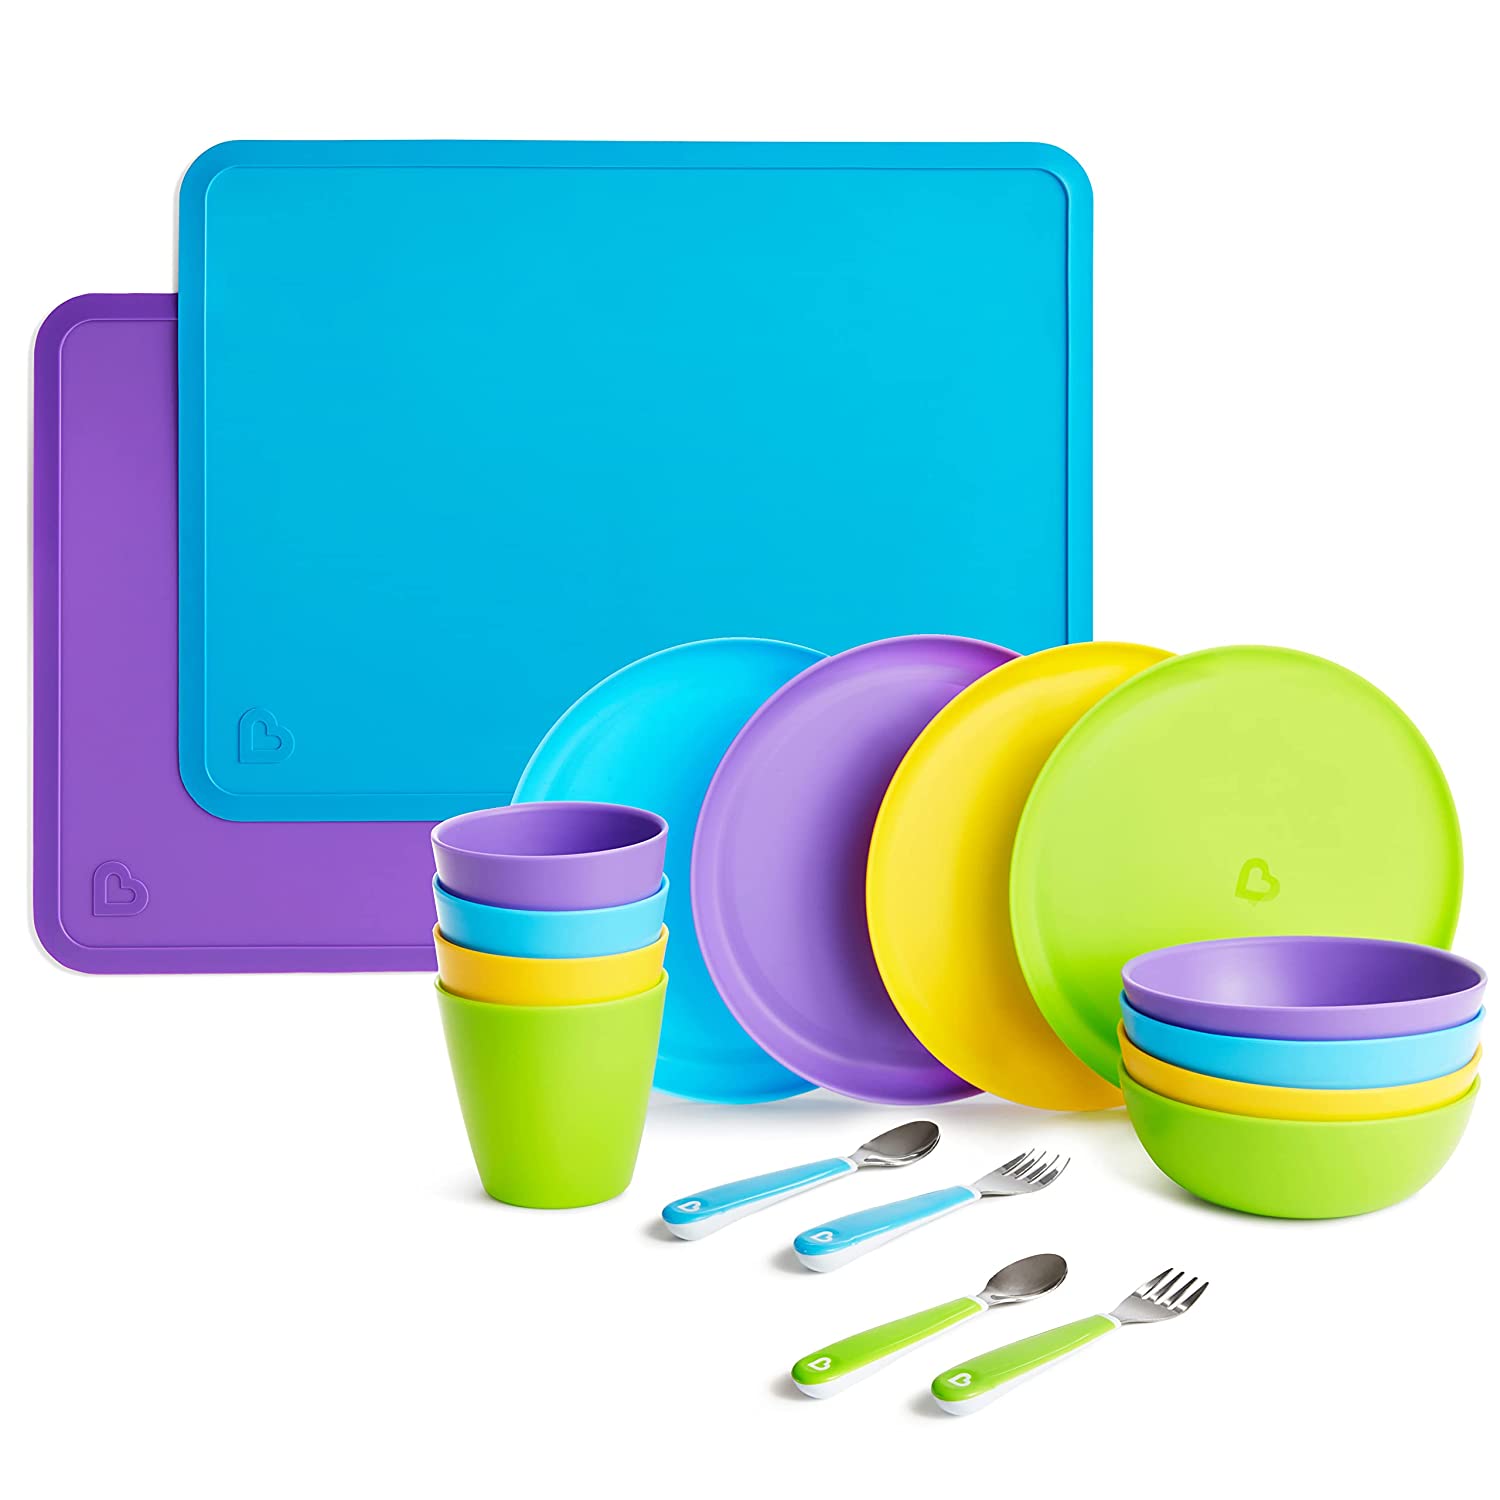 Munchkin Dishwasher Safe Plates, Placemats, Utensils For Toddlers, 16-Piece